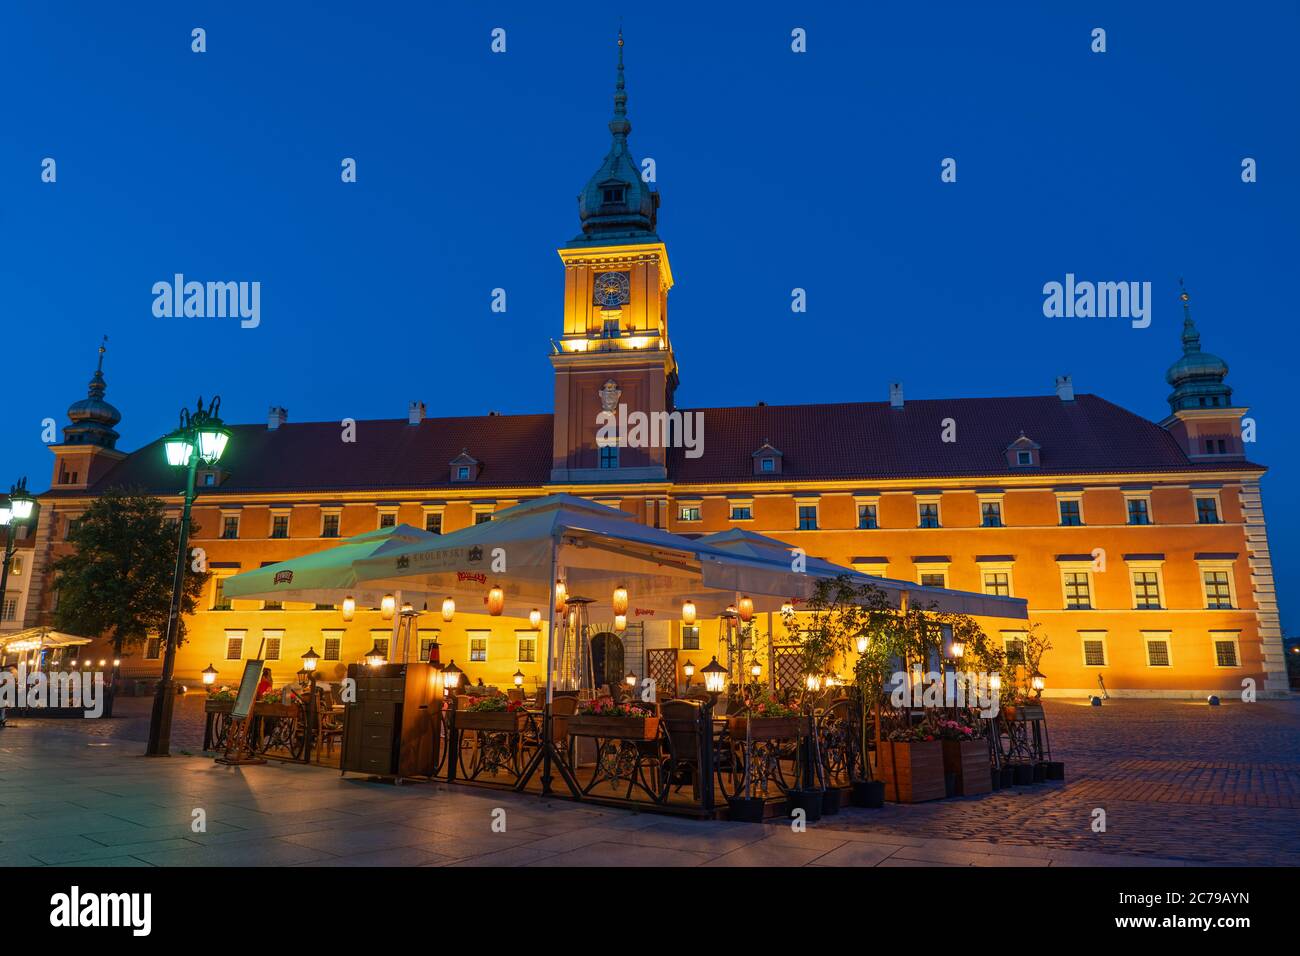 Royal Castle illuminated at night and restaurant outdoor tables in city of Warsaw, Poland Stock Photo